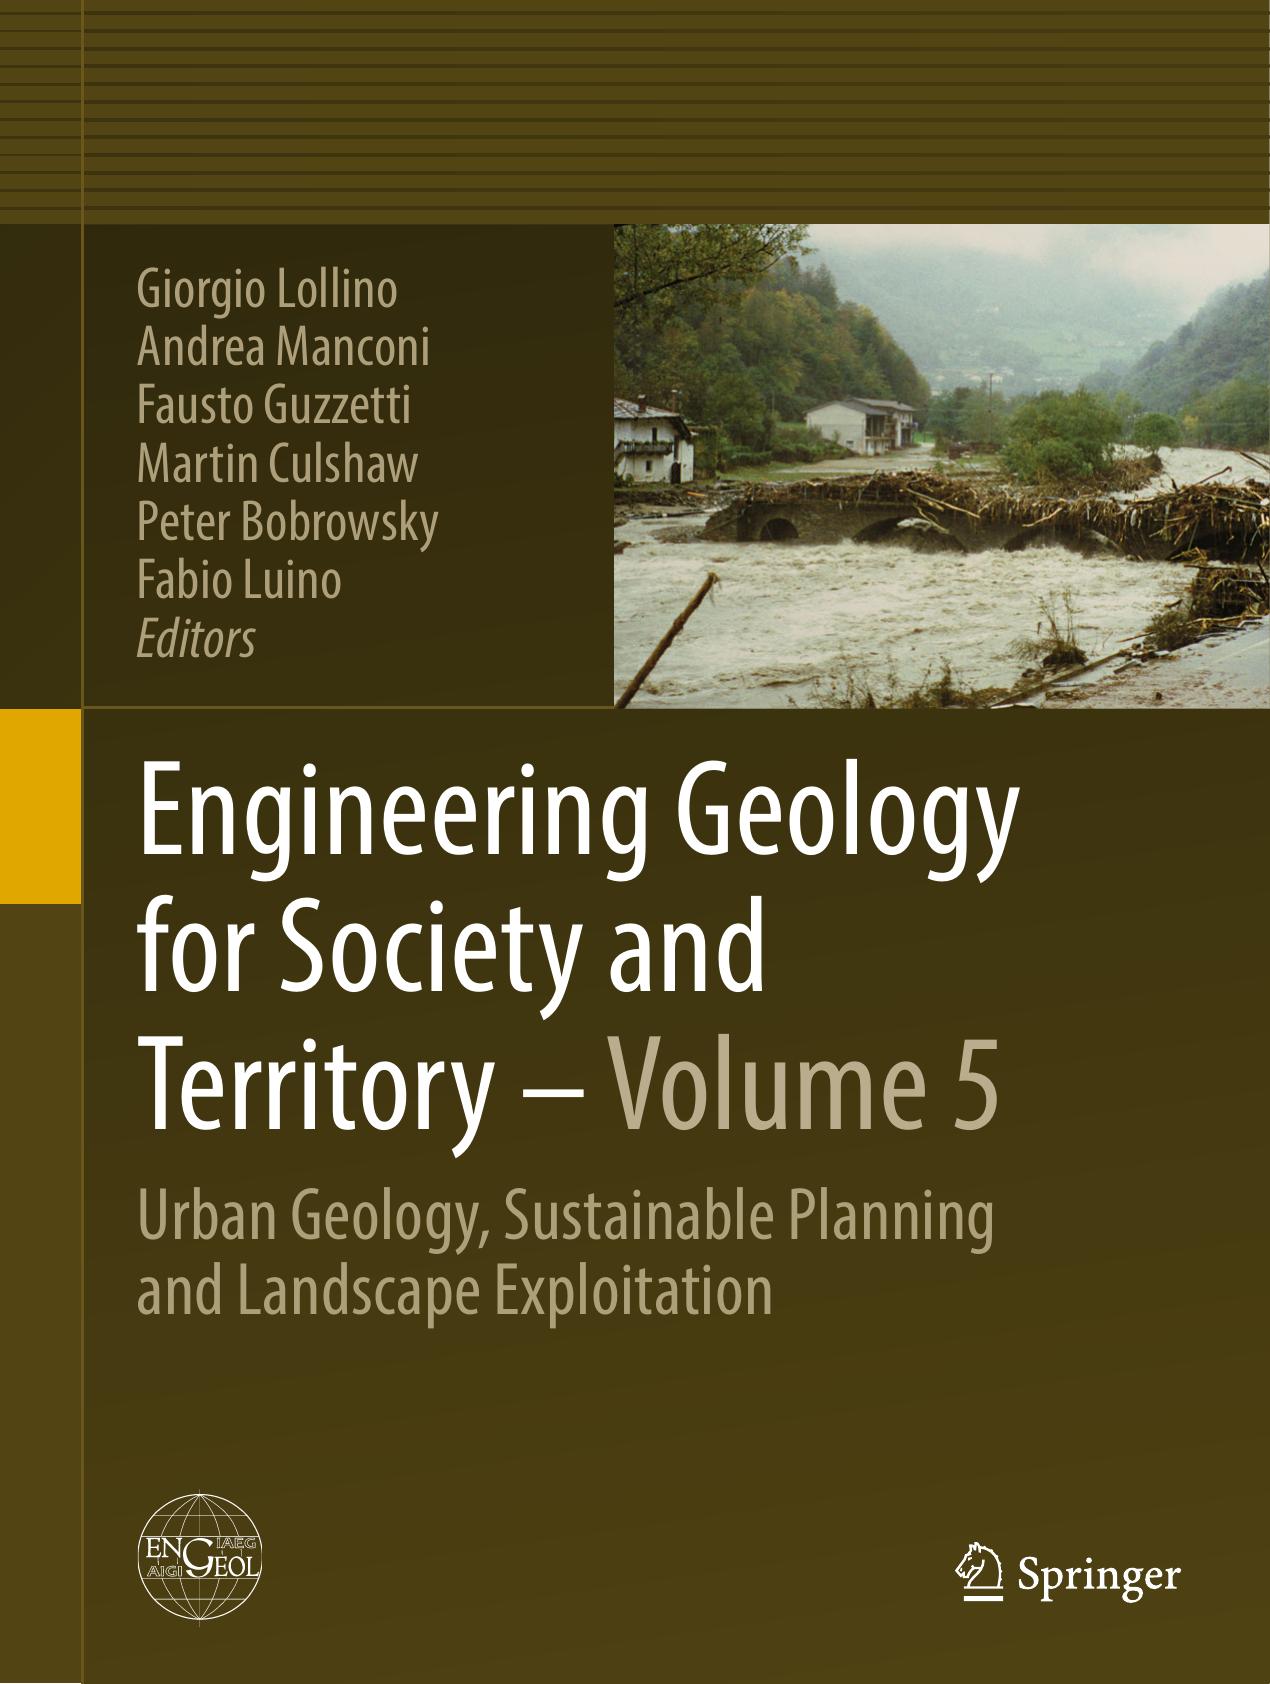 Engineering Geology for Society and Territory 2015